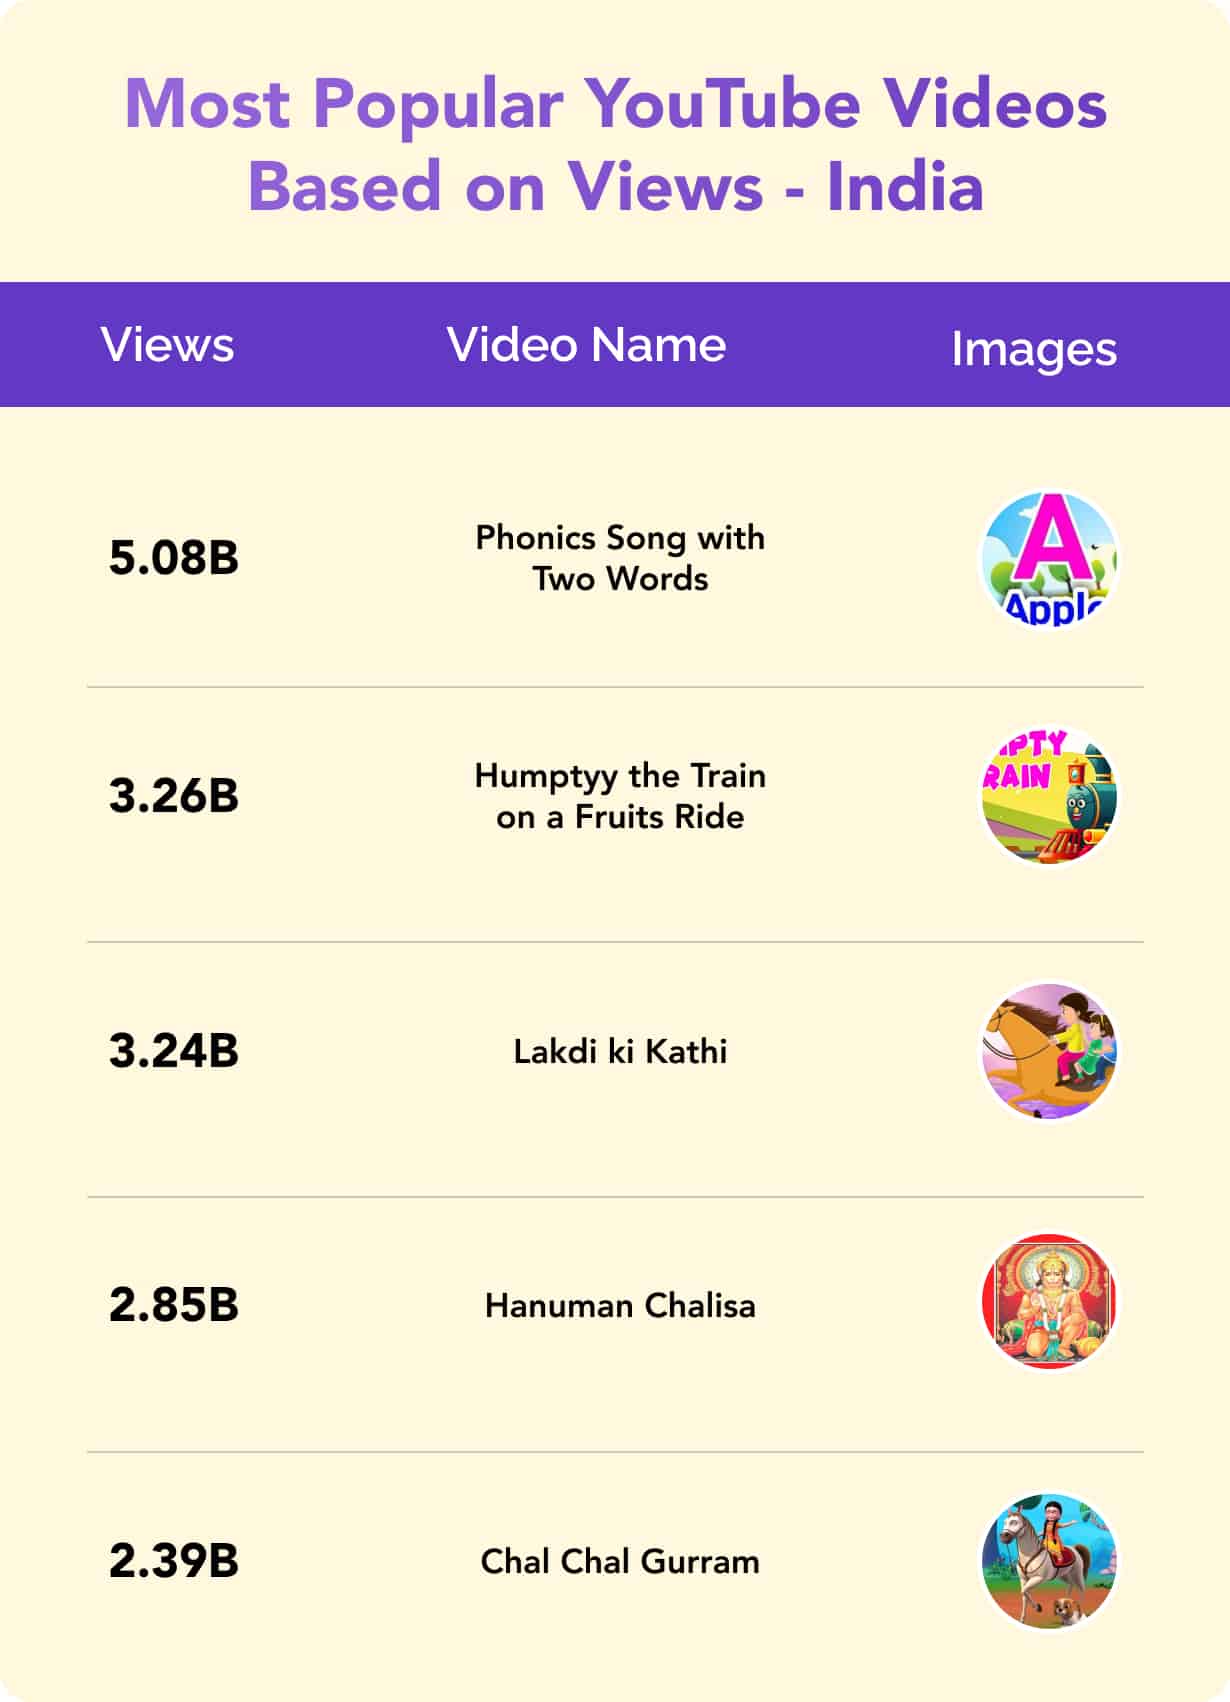 Most-Popular-Youtube-Videos-based-on-Views-In-India-1